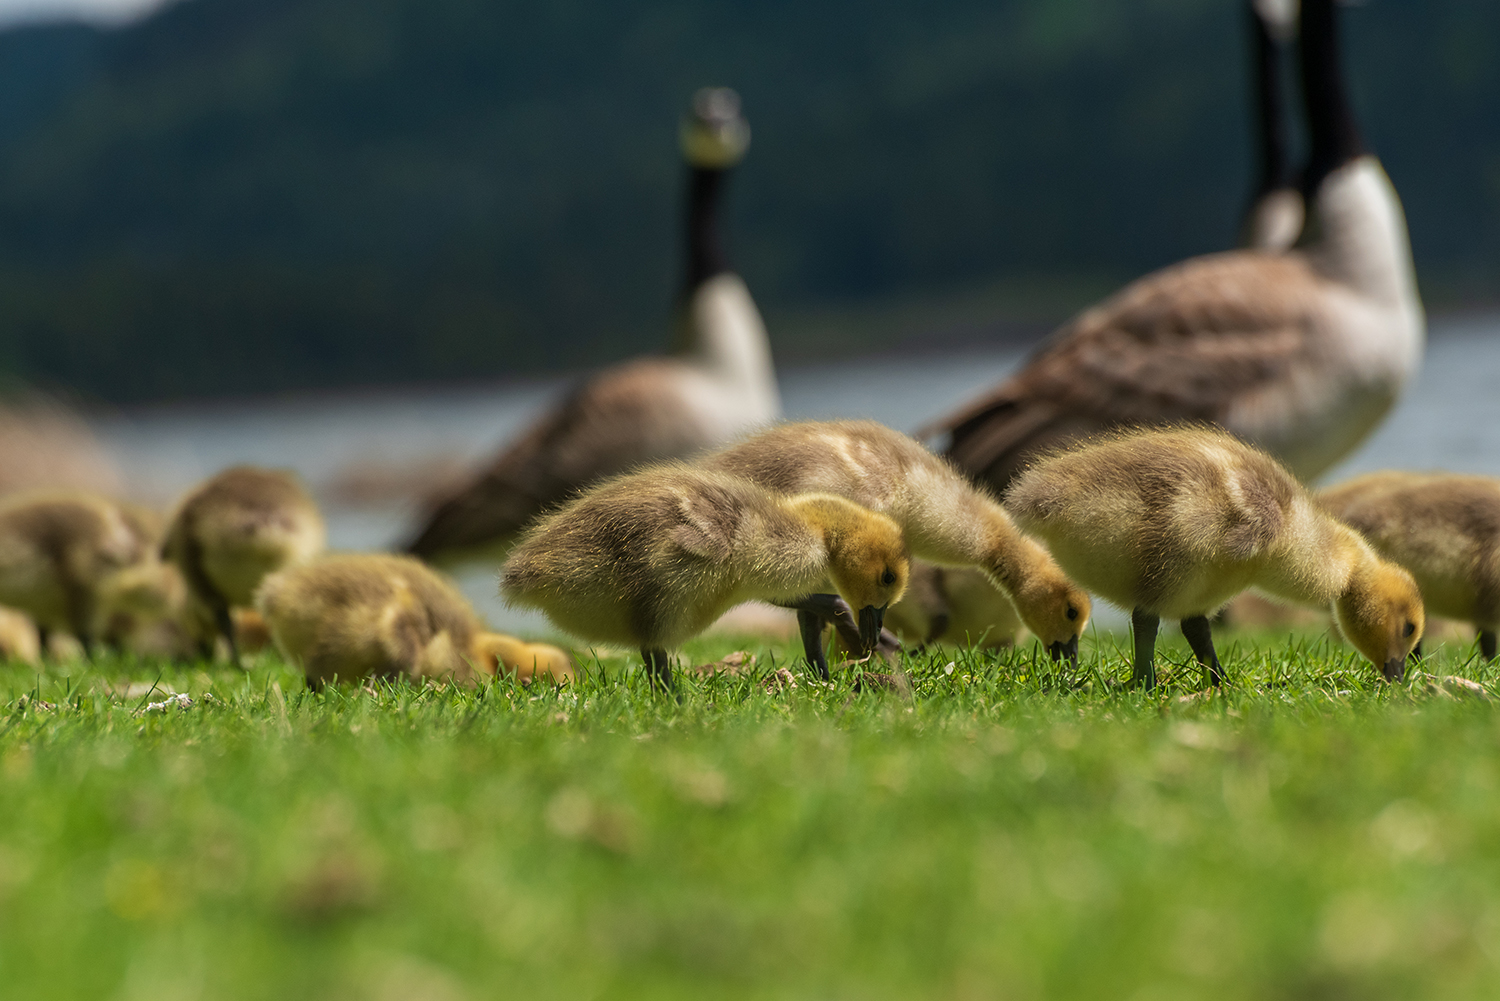 Kamloops Fauna closeup of Canadian goslings with full-grown geese in the background